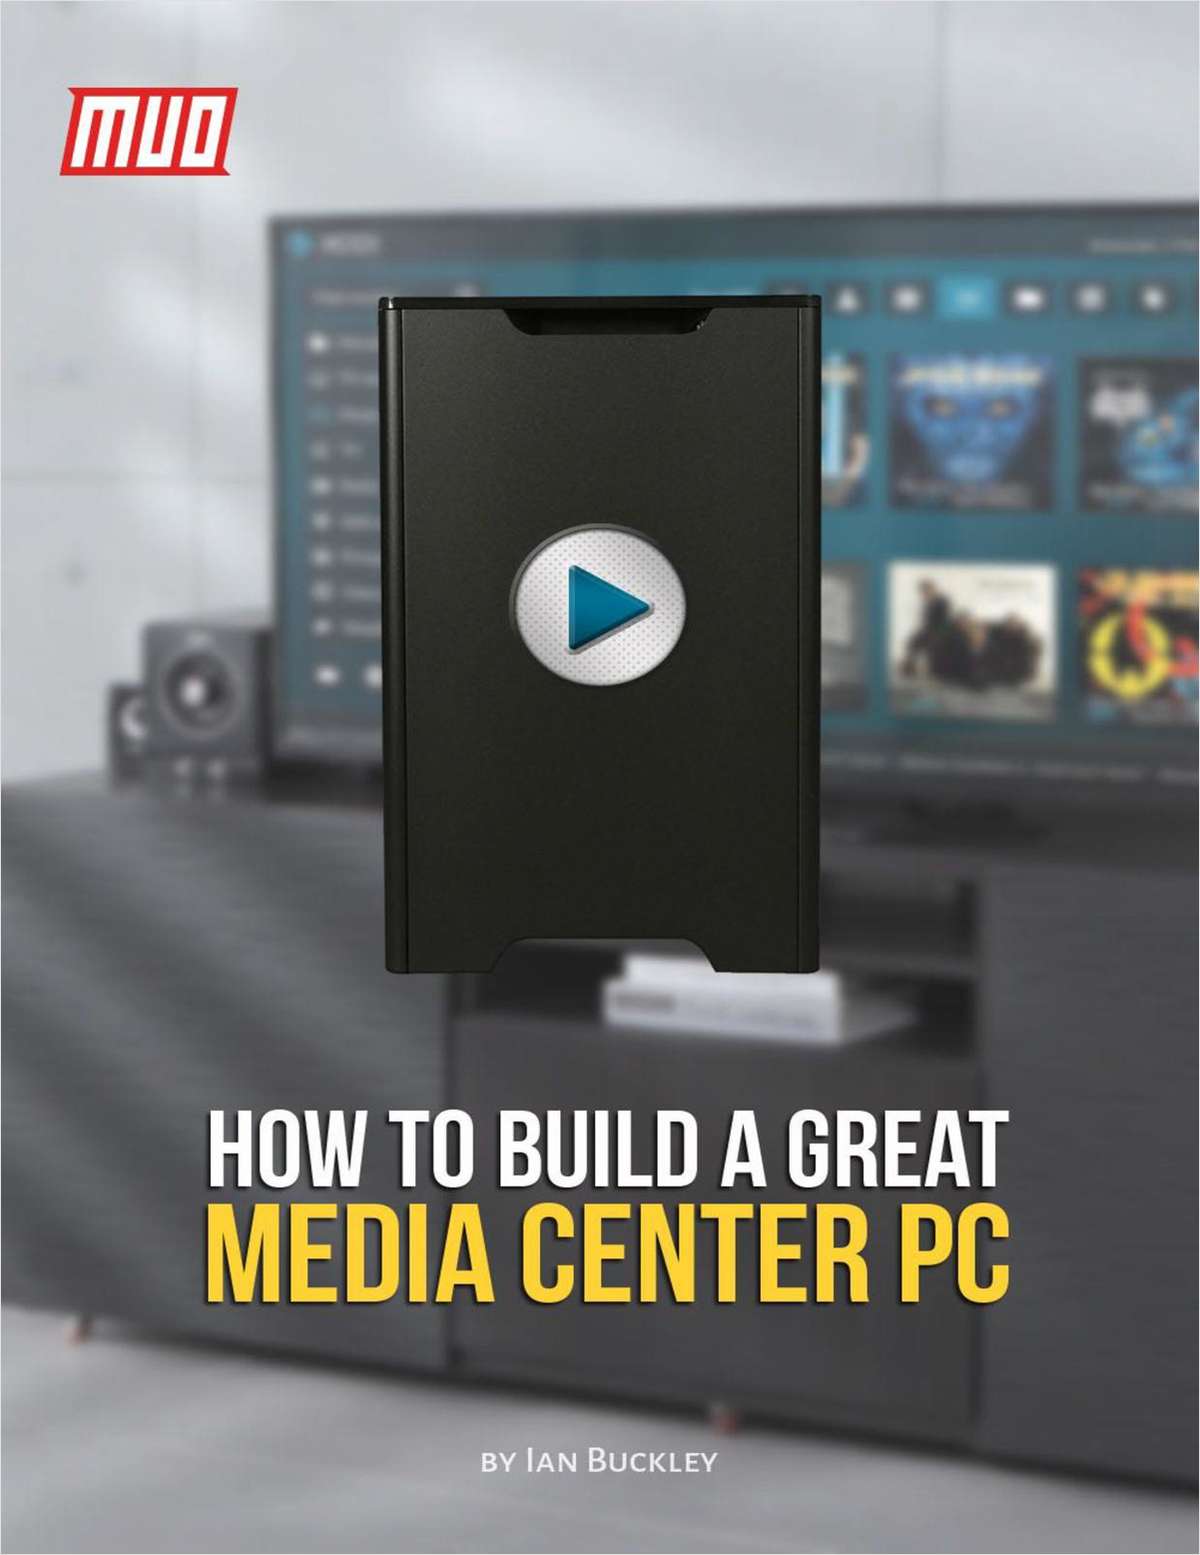 How to Build a Great Media Center PC